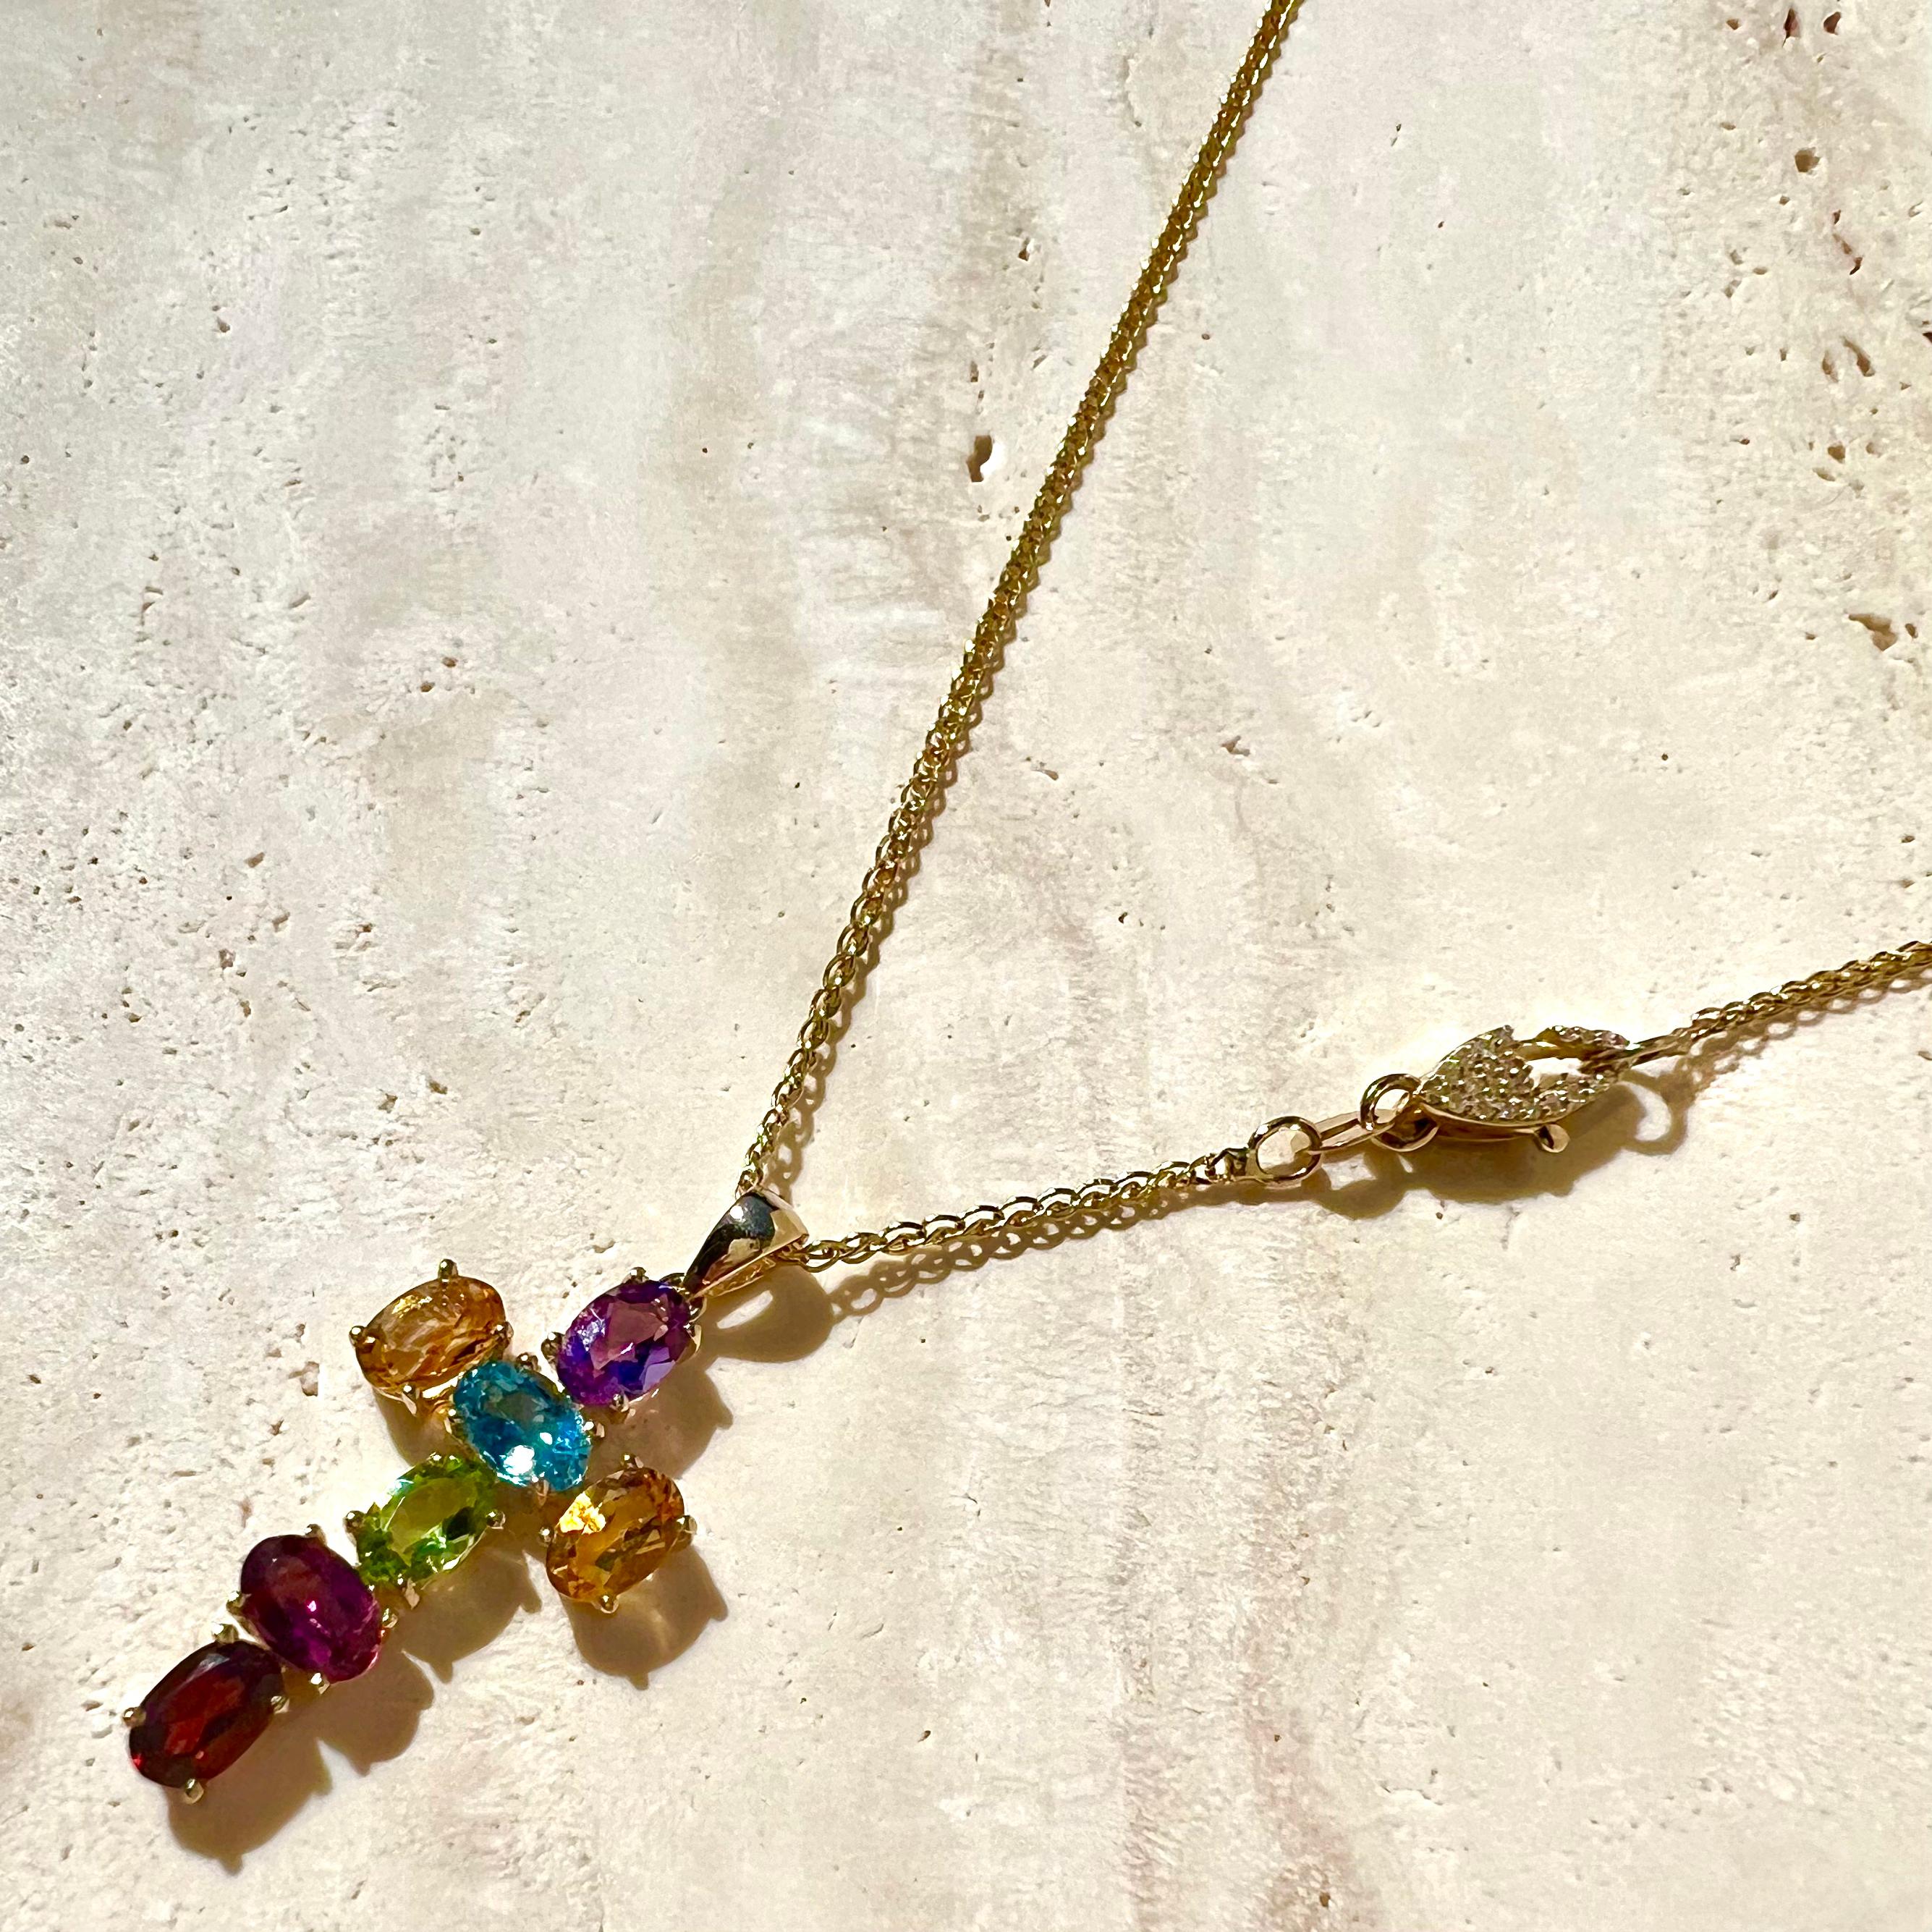 A 14k gold cross pendant composed of our dream stones...amethyst, citrine, blue topaz, peridot, rhodolite garnet, and garnet. Paired with a custom pavé double-sided diamond clasp and solid 14k gold wheat chain. Can be styled with the diamond clasp